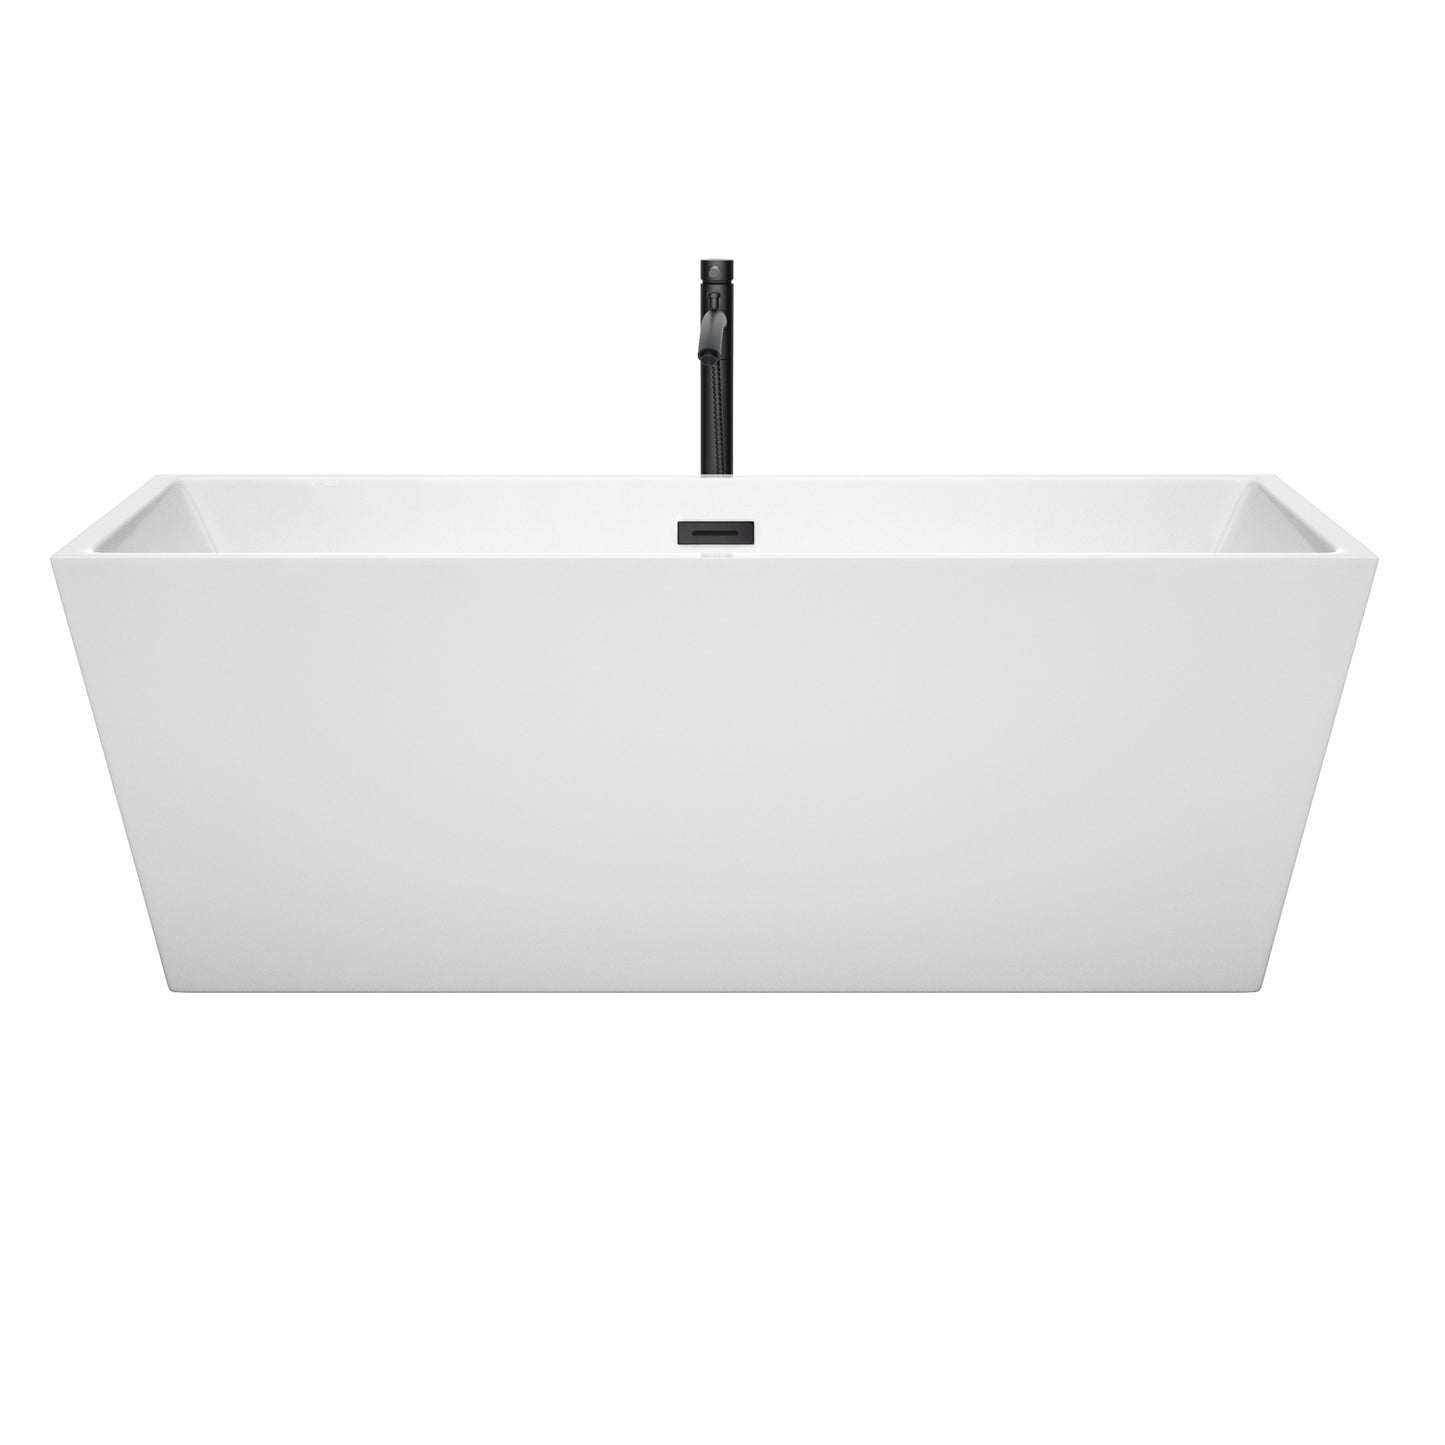 Wyndham Collection Sara 67 Inch Freestanding Bathtub in White with Floor Mounted Faucet, Drain and Overflow Trim in Matte Black - Luxe Bathroom Vanities